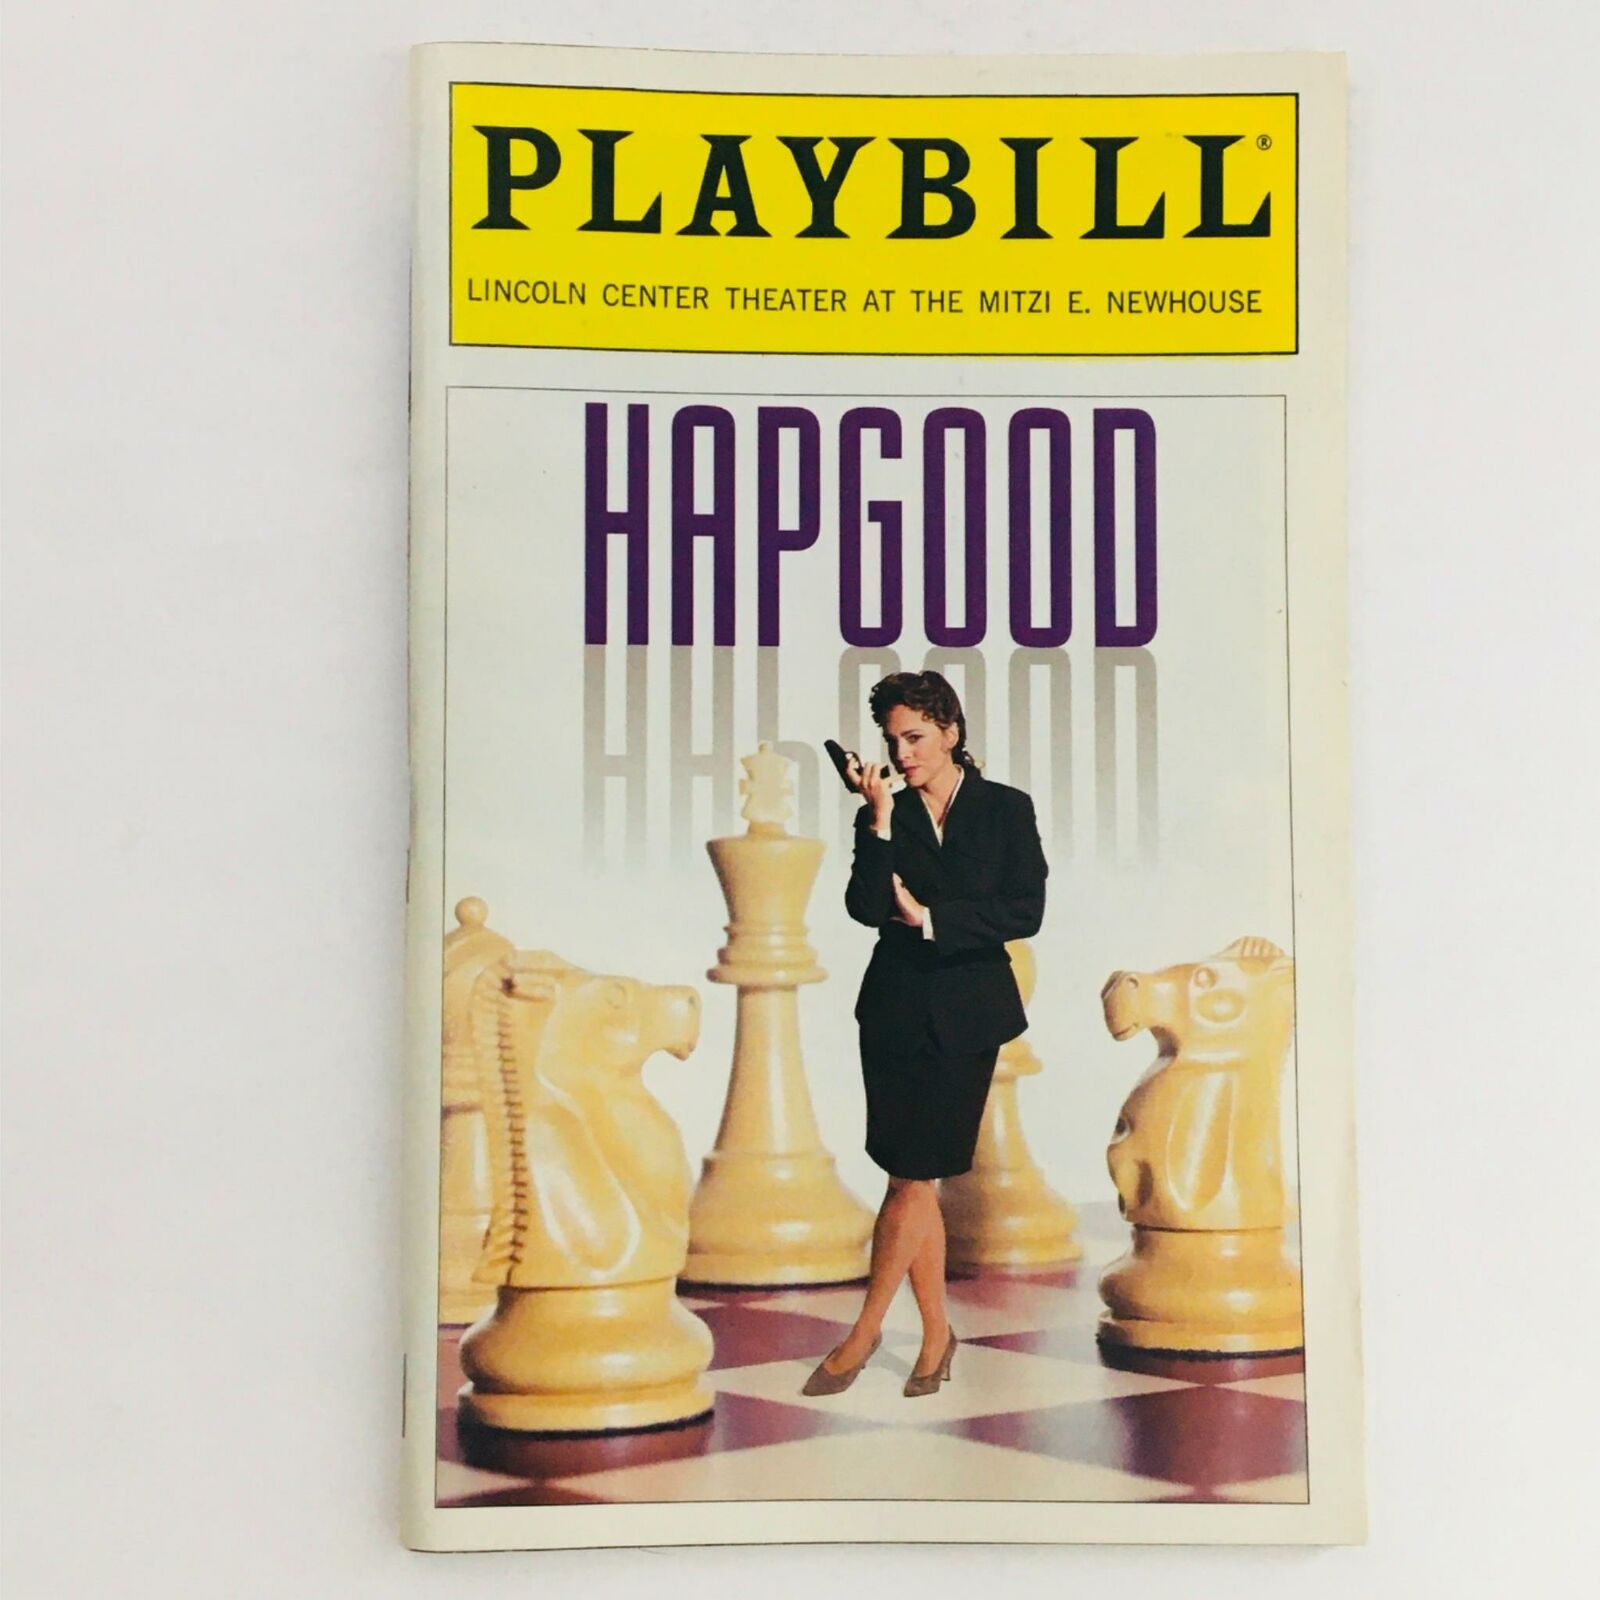 1994 Playbill Hapgood by Tom Stoppard, Jack O'Brien at Lincoln C